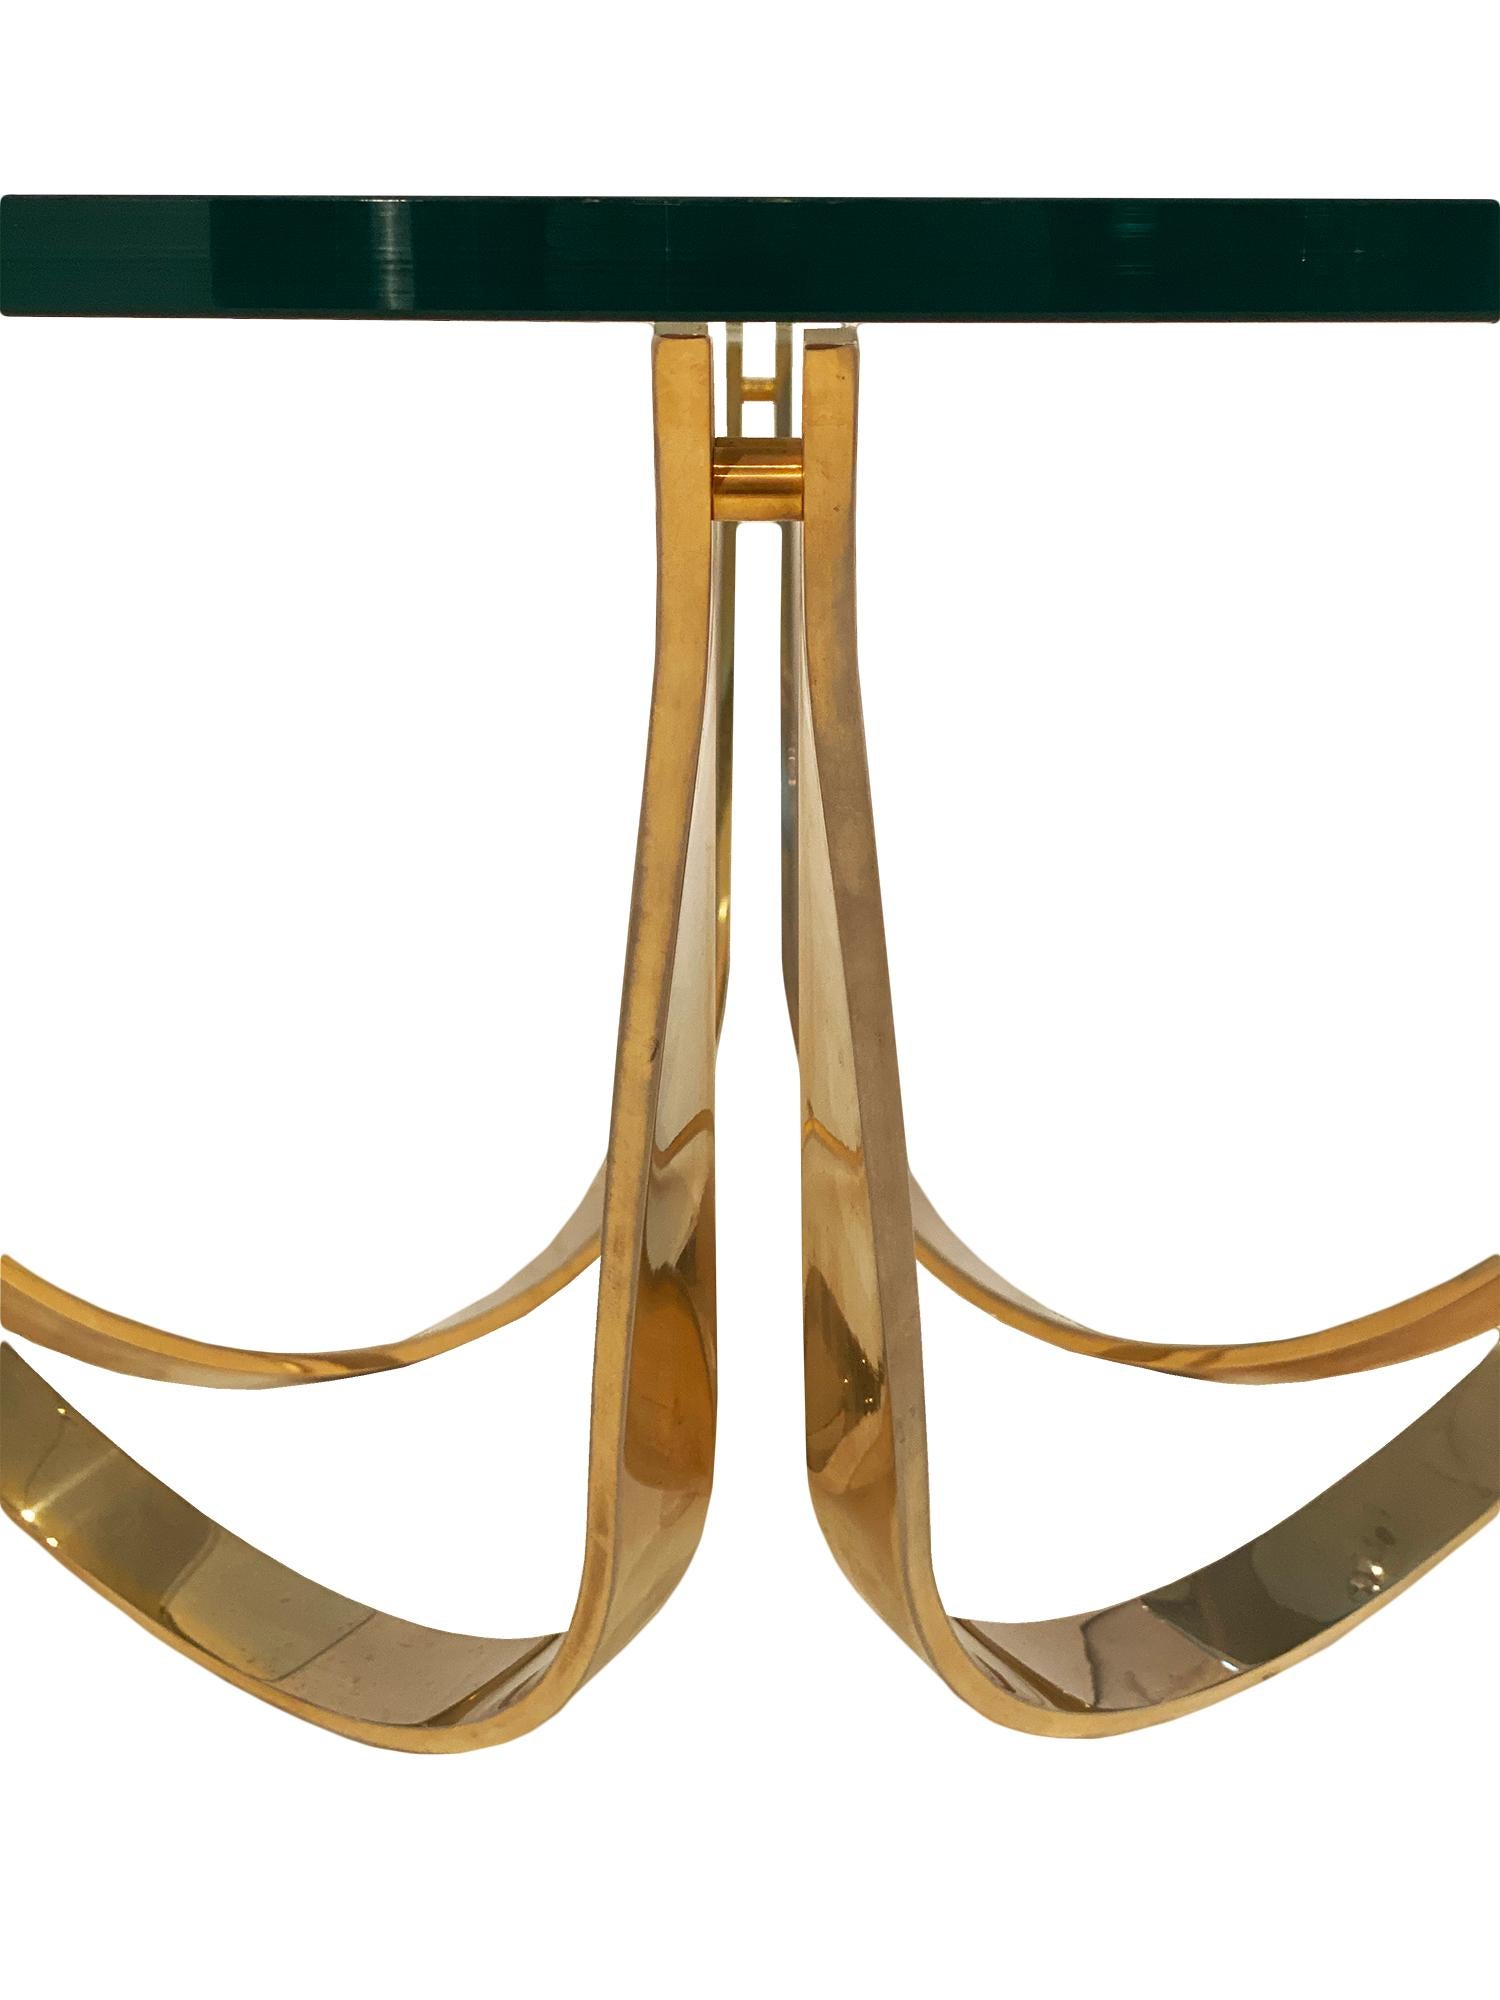 Vintage French coffee table featuring a strong gilt brass base shaped as interlaced bows. The top is a thick clear glass slab.